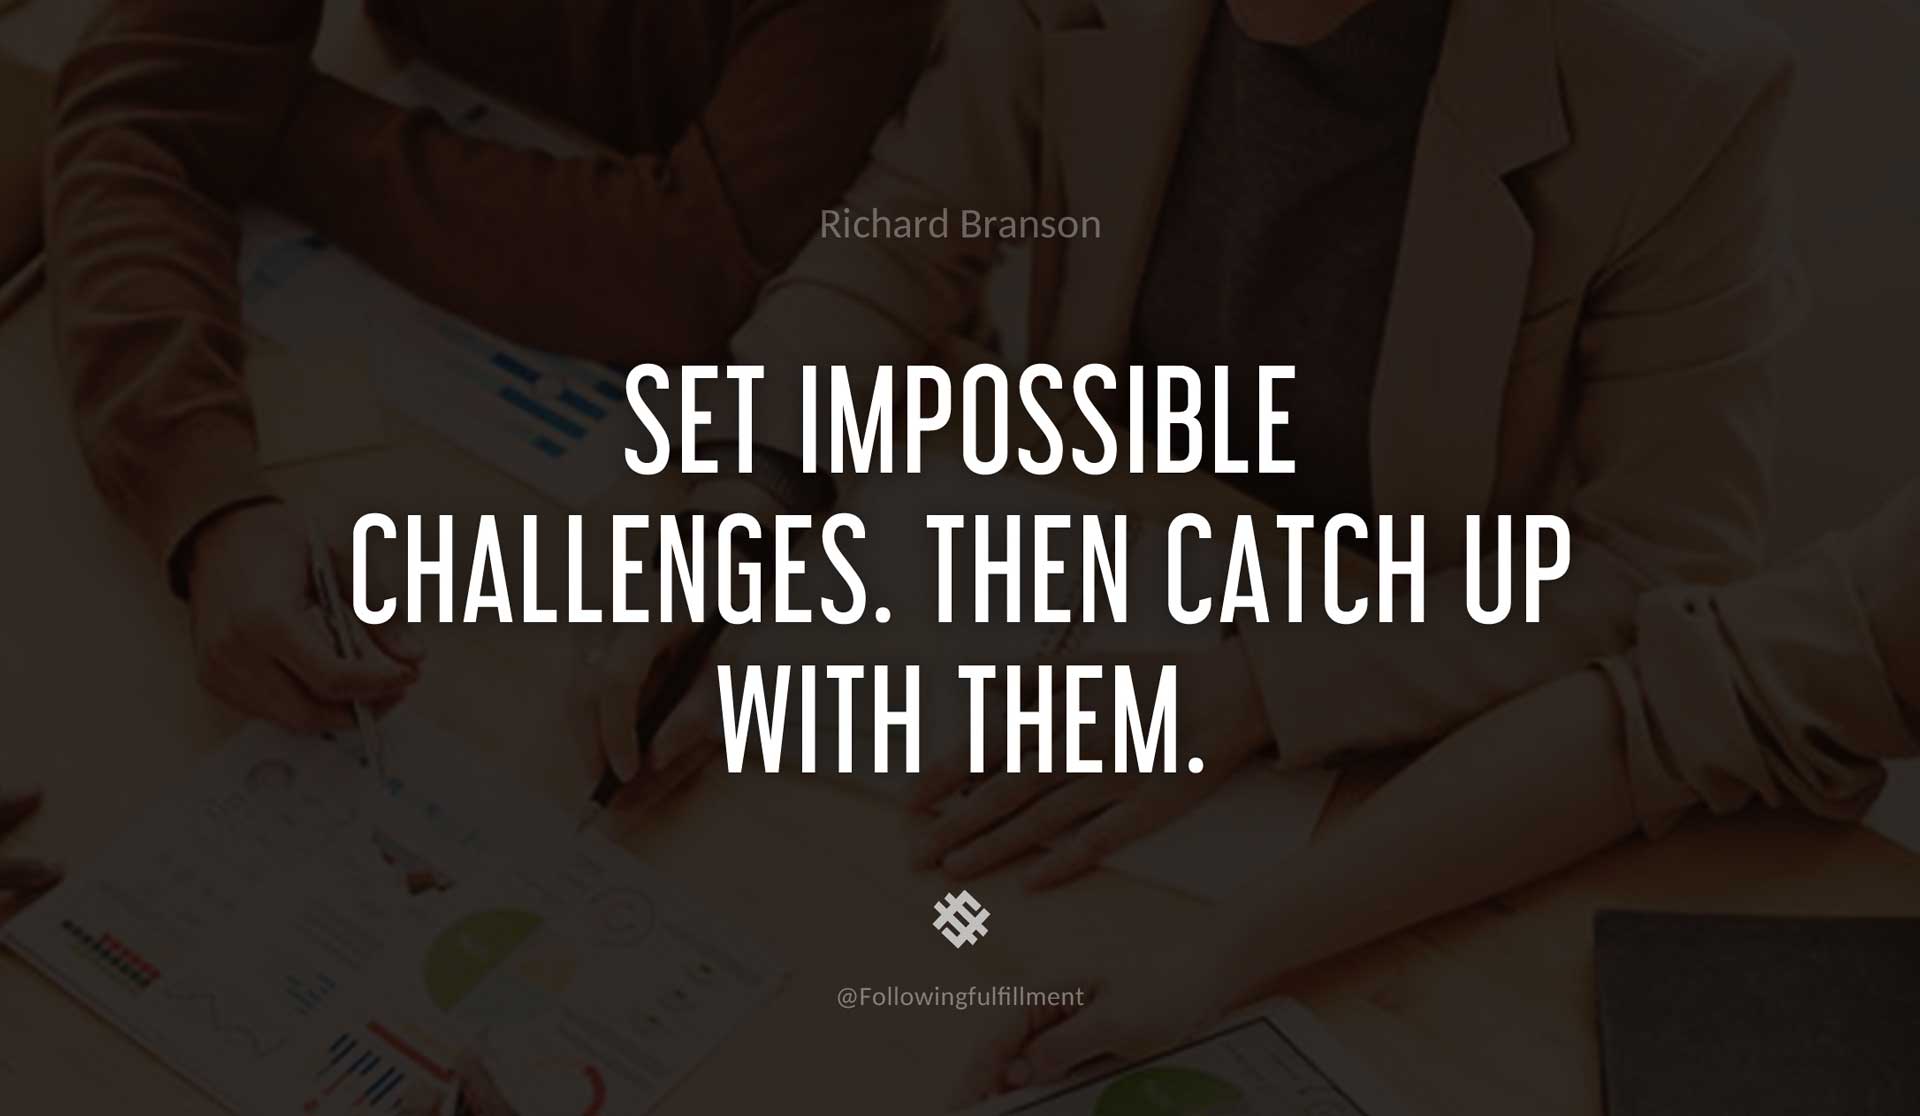 Set-impossible-challenges.-Then-catch-up-with-them.-RICHARD-BRANSON-Quote.jpg